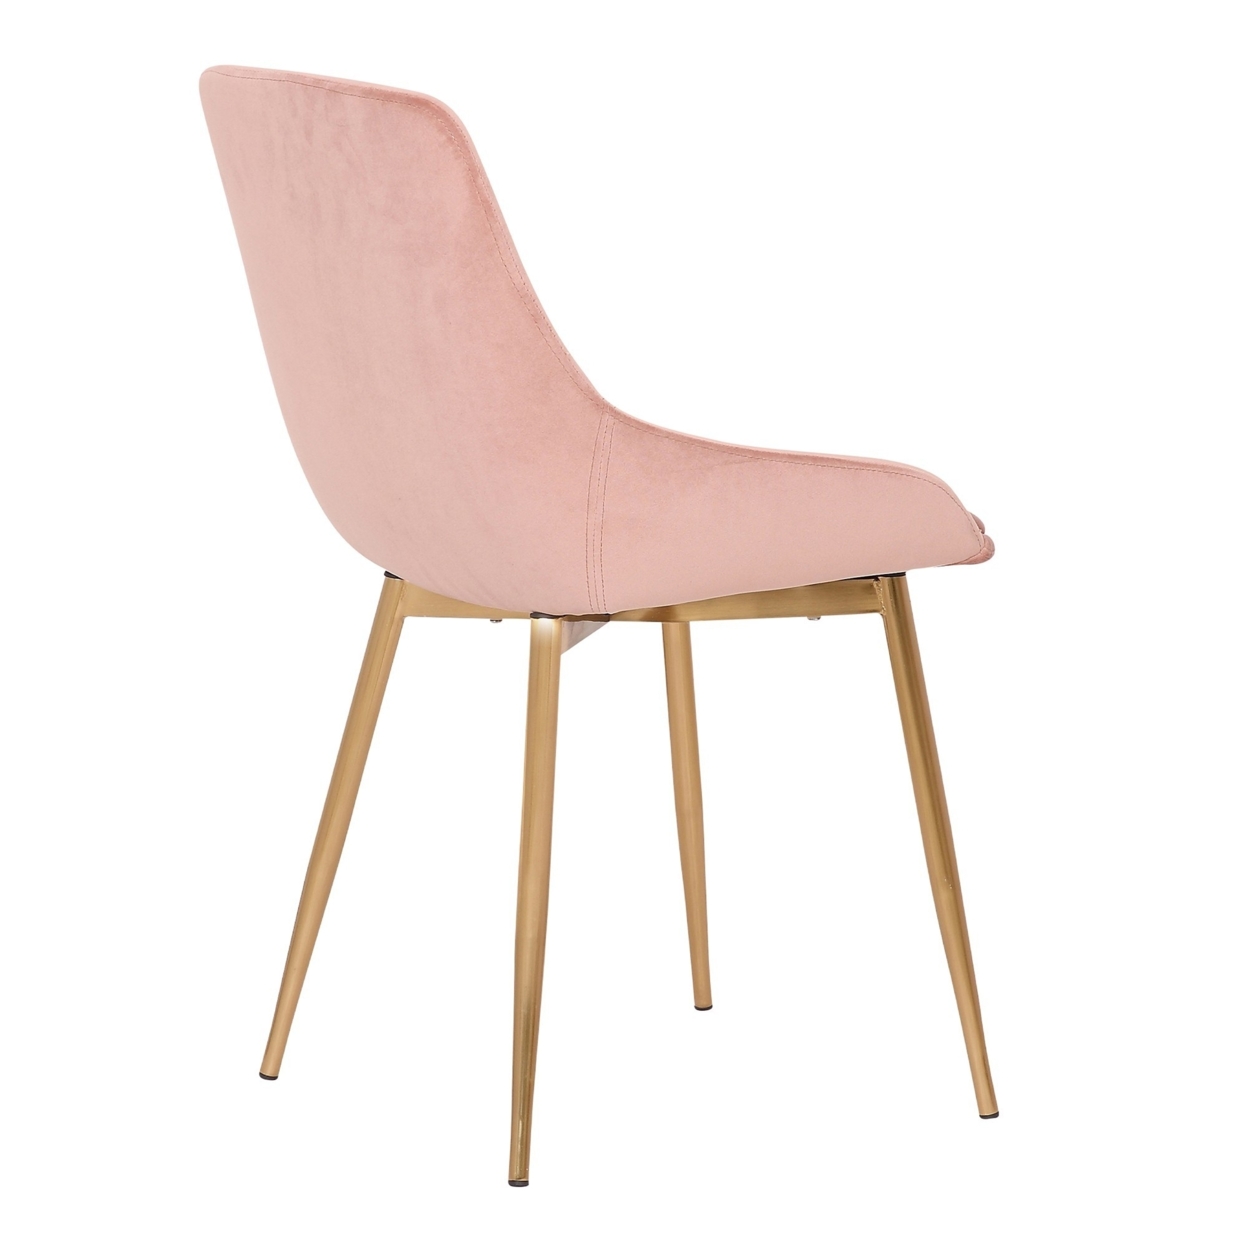 Countered Fabric Upholstered Dining Chair With Sleek Metal Legs, Pink- Saltoro Sherpi